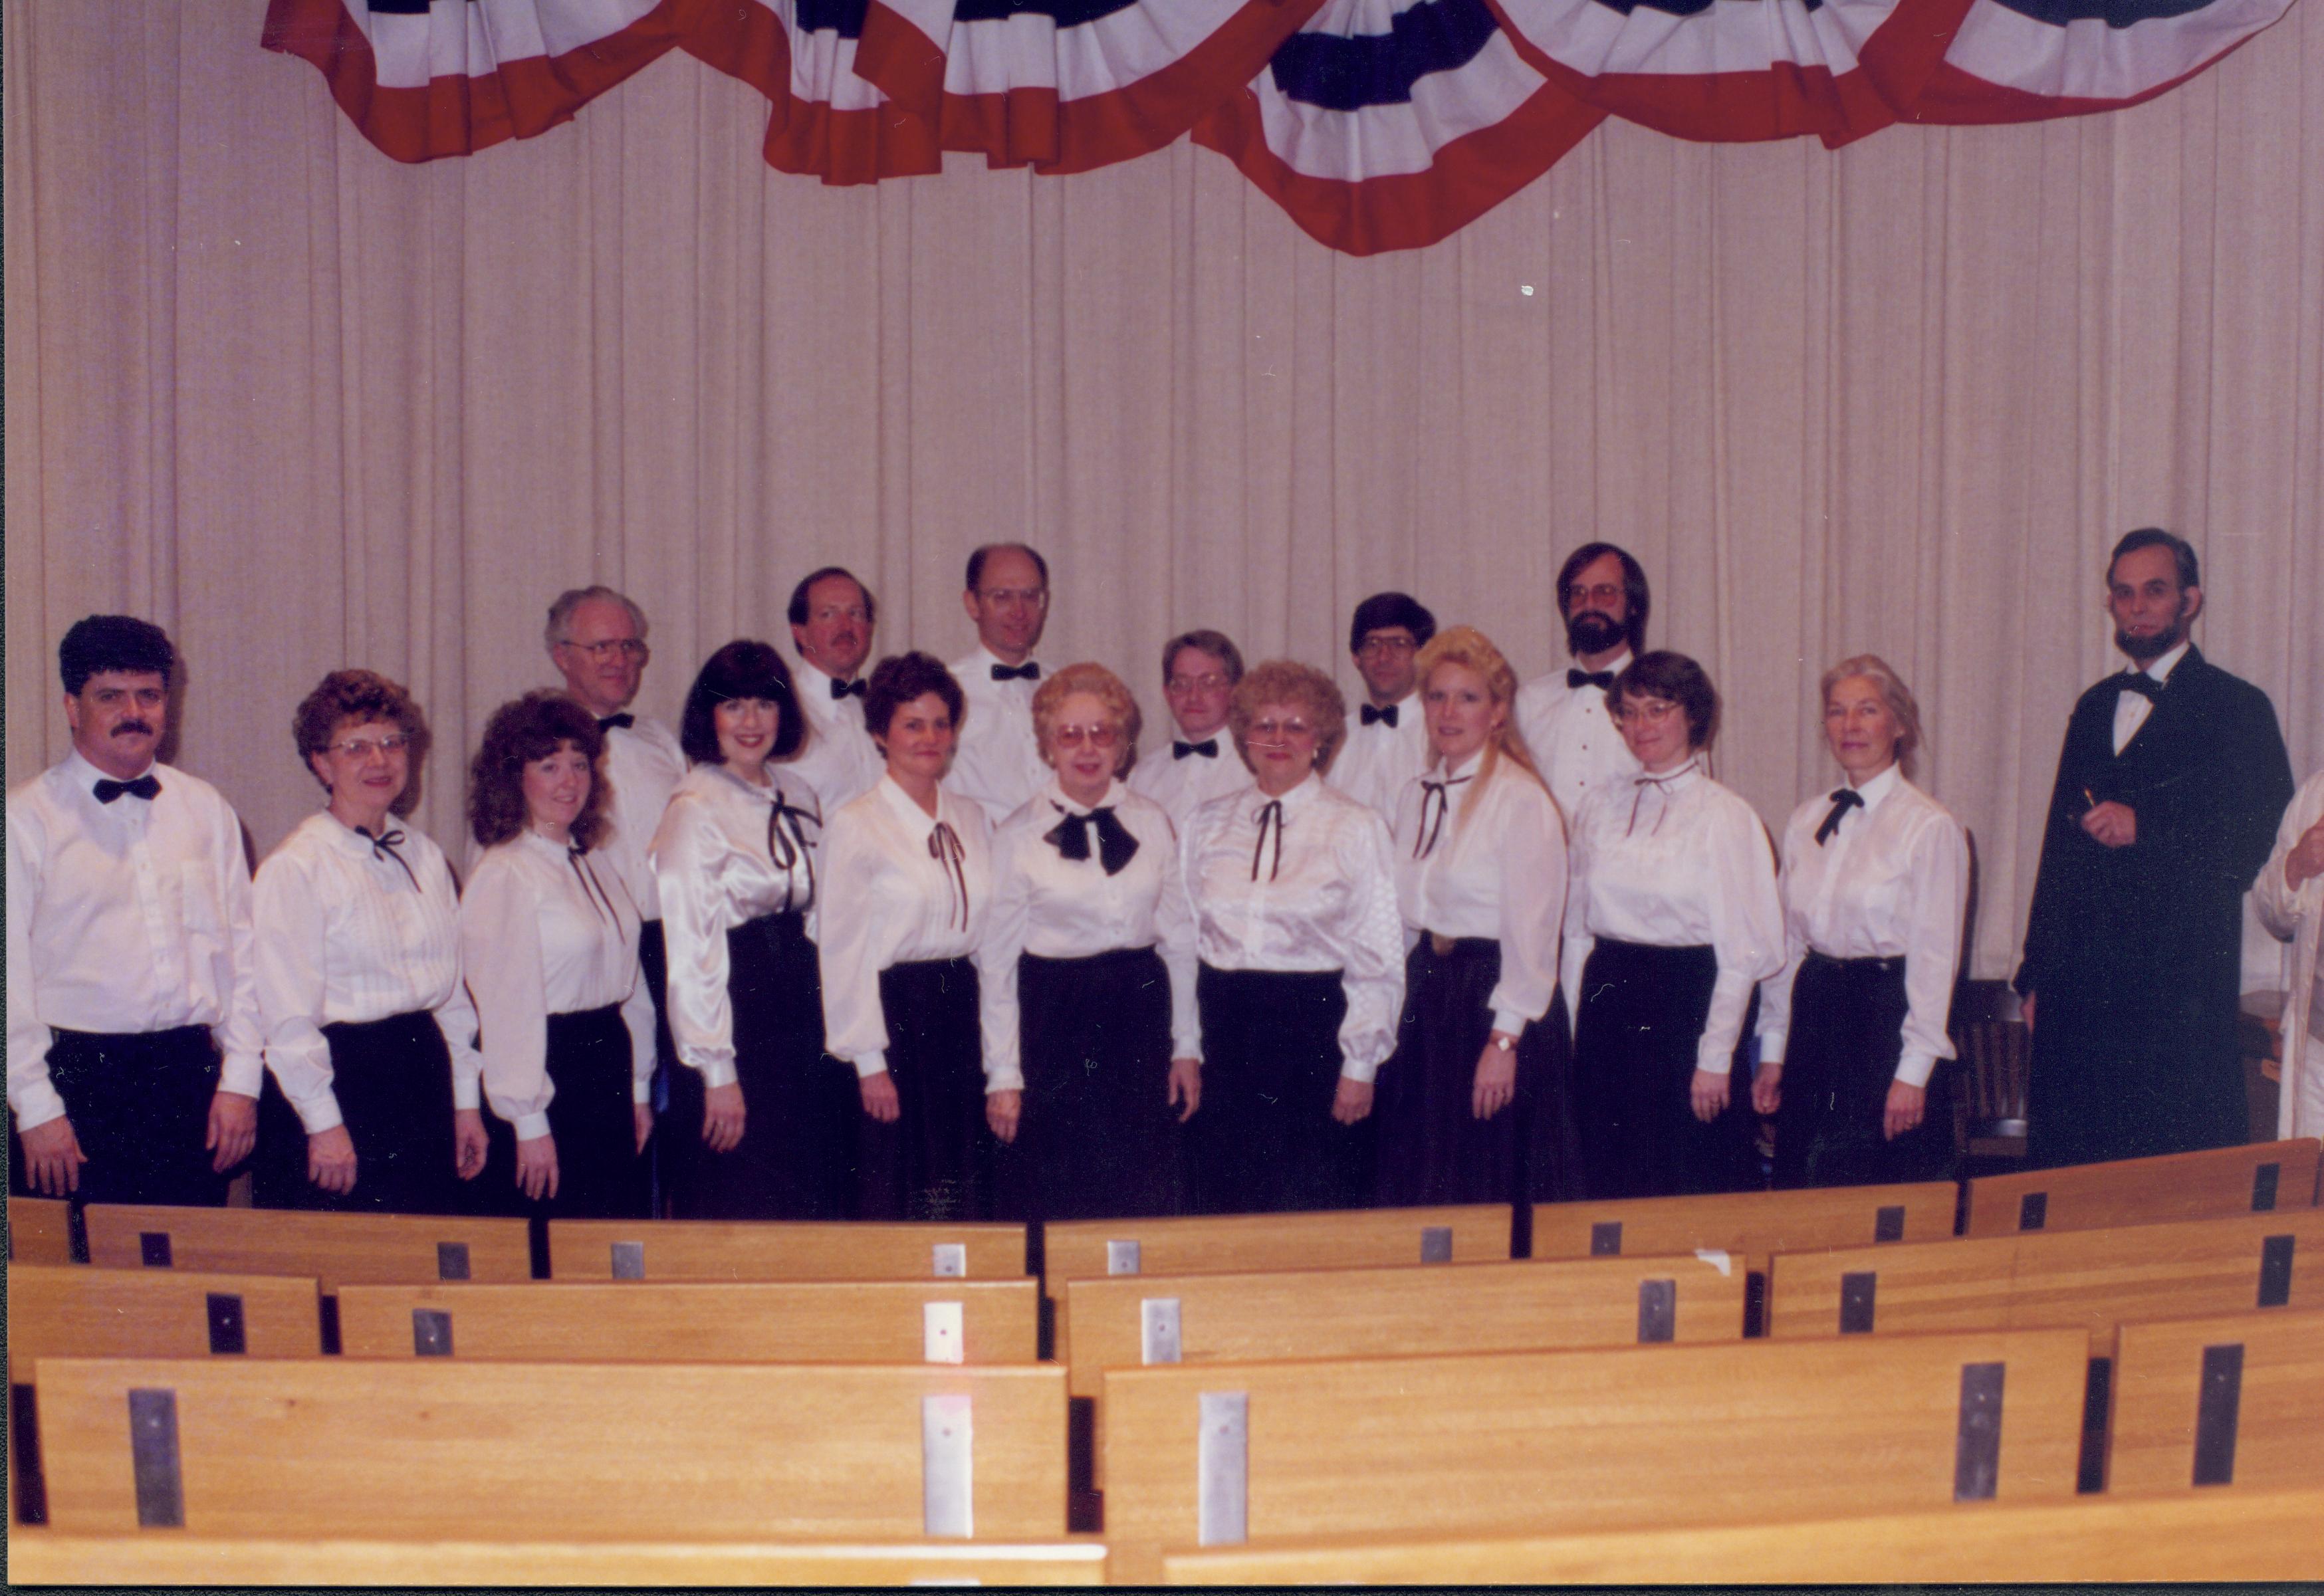 Choir standing in front of curtain with impersonators. Lincoln Home NHS- Lincoln's Birthday 1988 birthday, Lincoln, Douglas